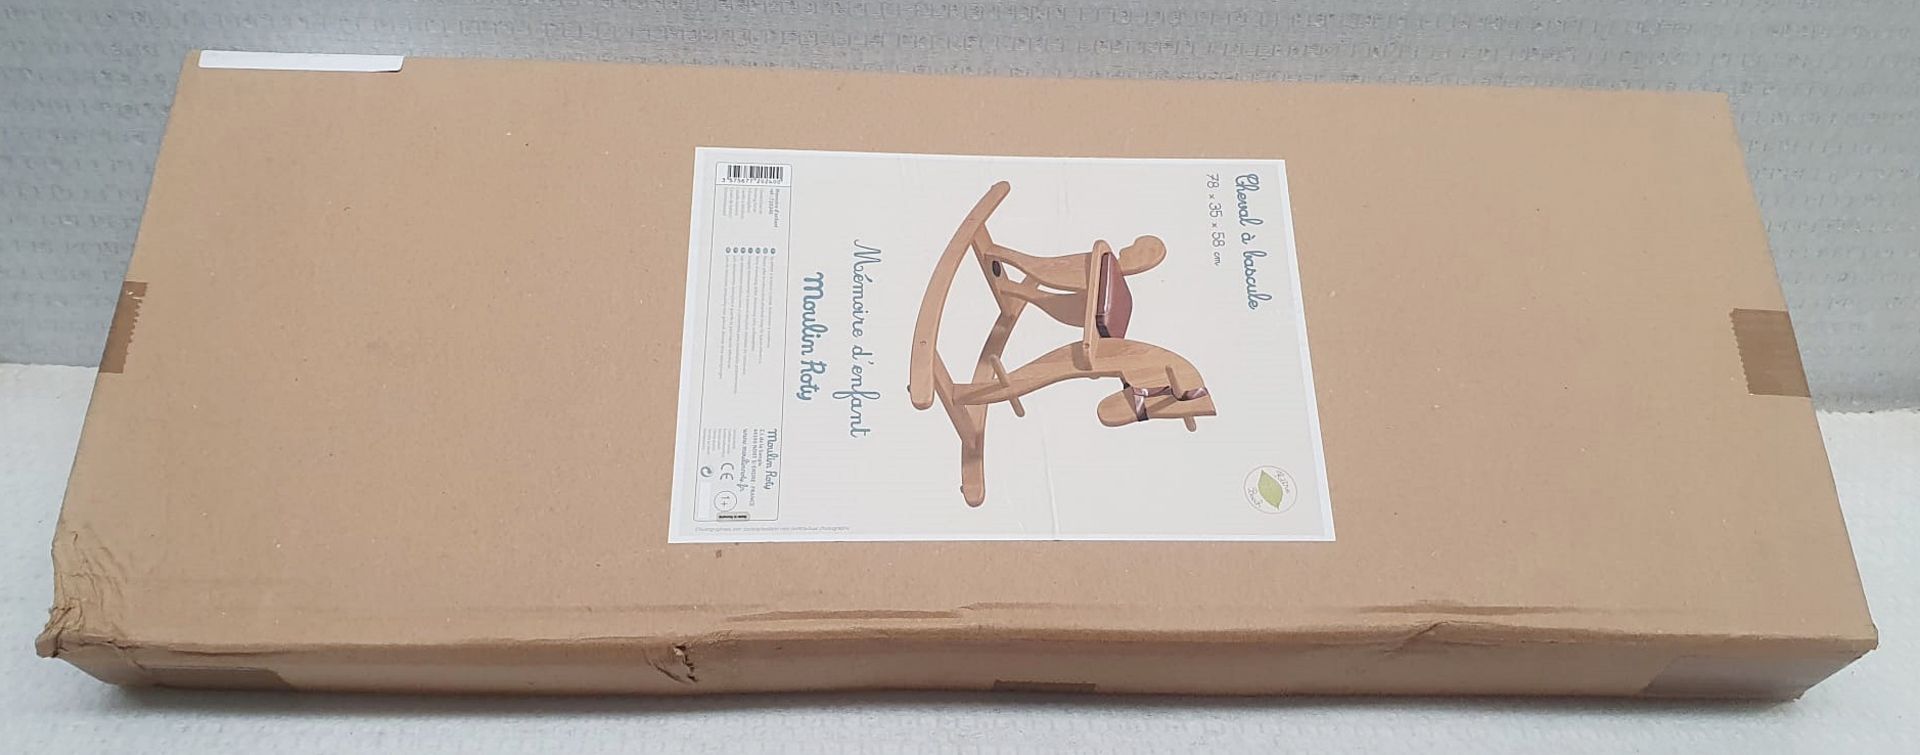 1 x MOULIN ROTY Luxury Wooden Rocking Horse - Original Price £129.00 - Unused Boxed Stock - Ref: - Image 4 of 5